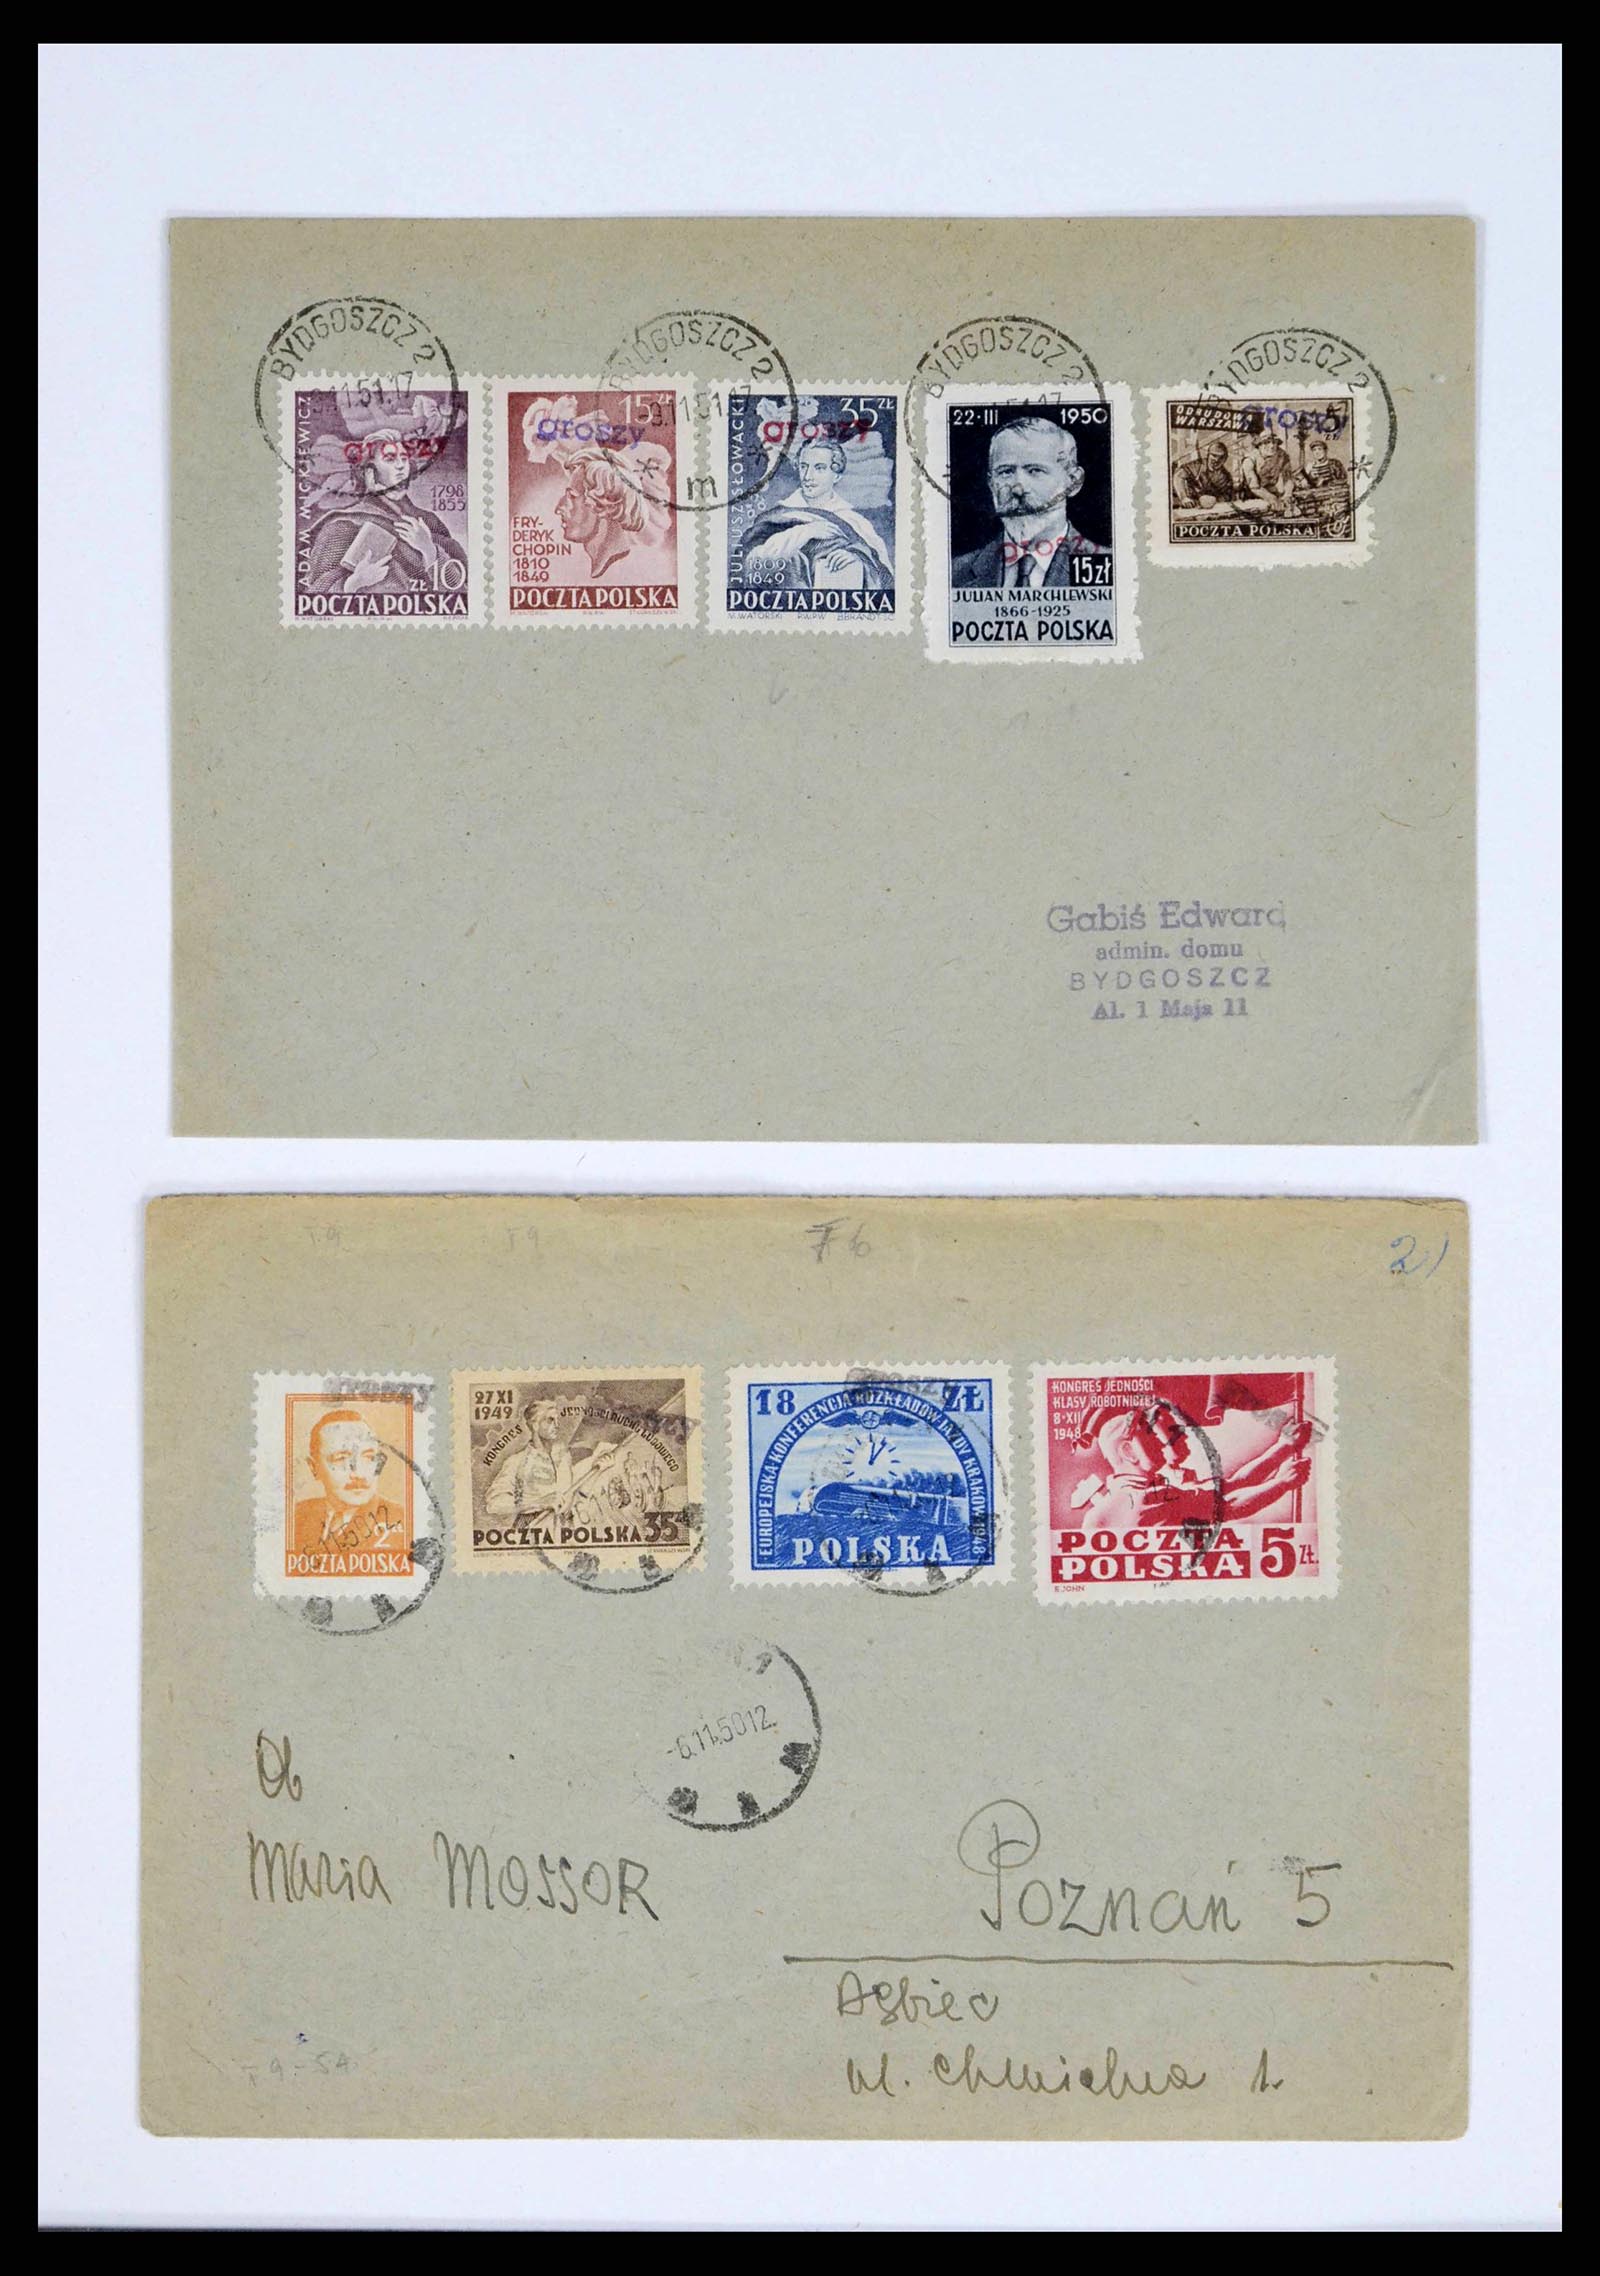 38201 0028 - Stamp collection 38201 Groszy overprints on cover 1950-1951.